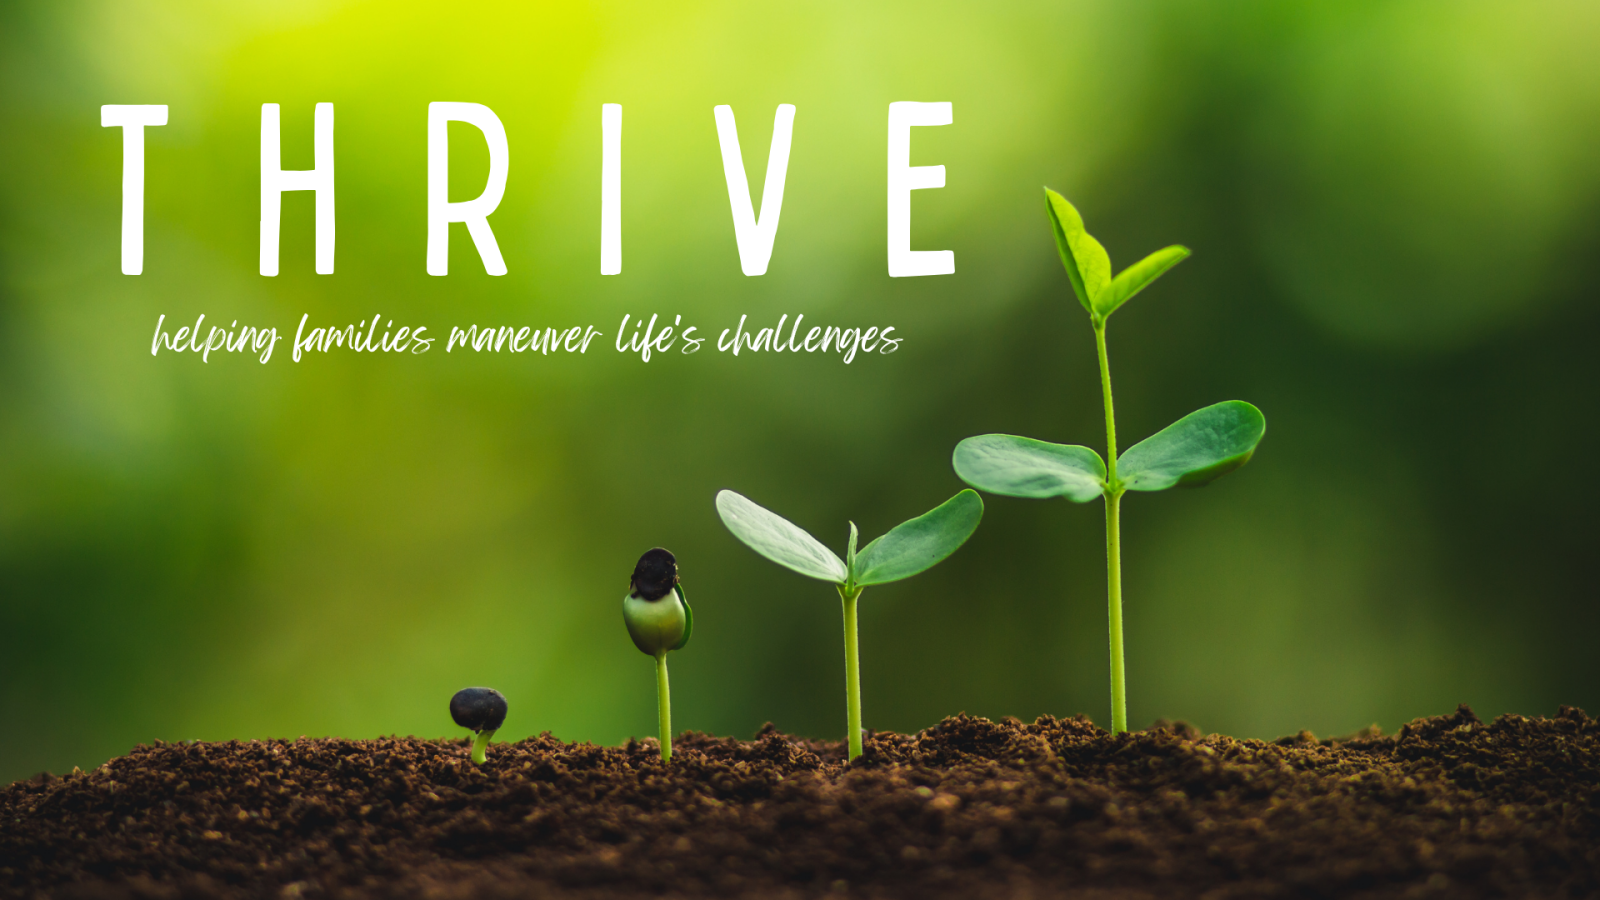 THRIVE: helping families maneuver life's challenges